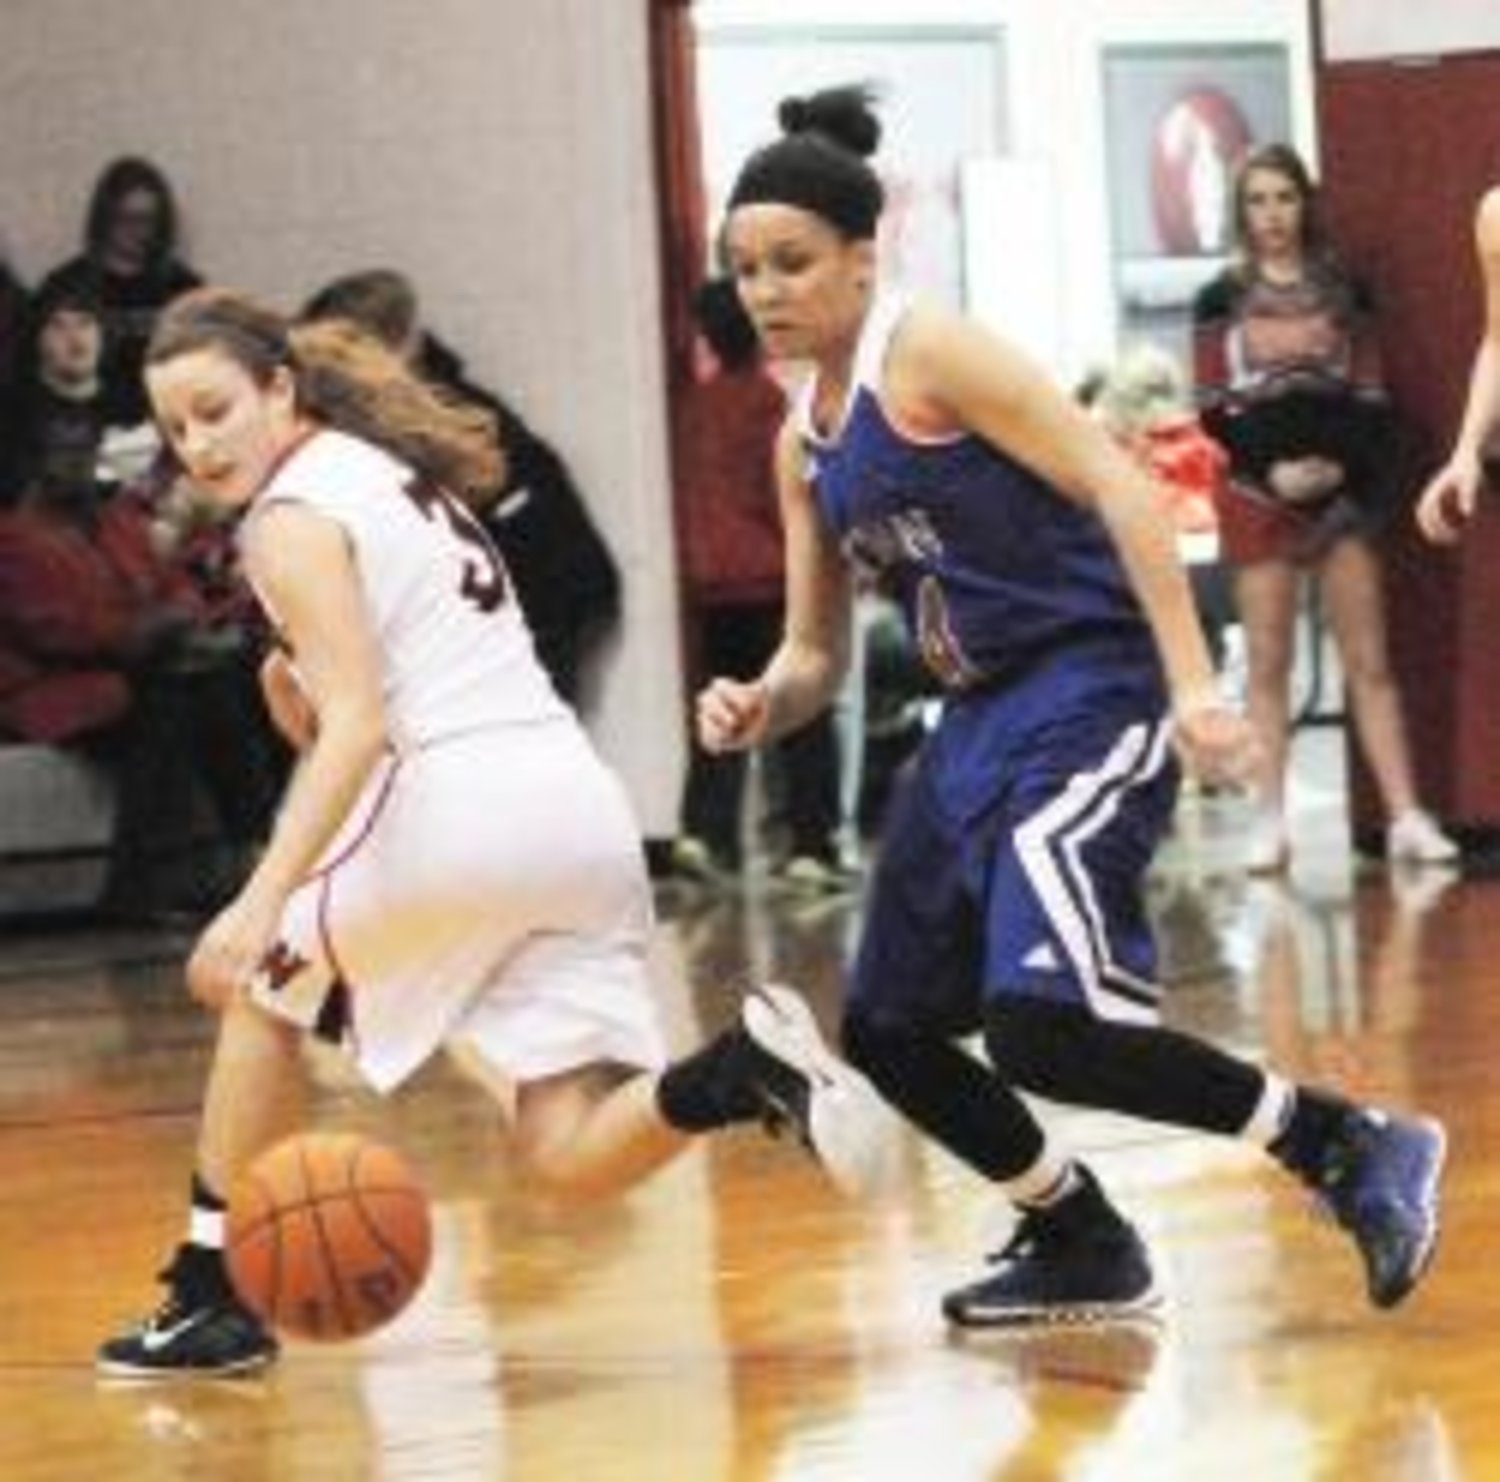 Quitman's Dawn Houck steals the ball from Winnsboro's Kelsey Green and scores early in the second quarter to get the Lady Bulldogs to within three points, trailing Winnsboro 14-11.